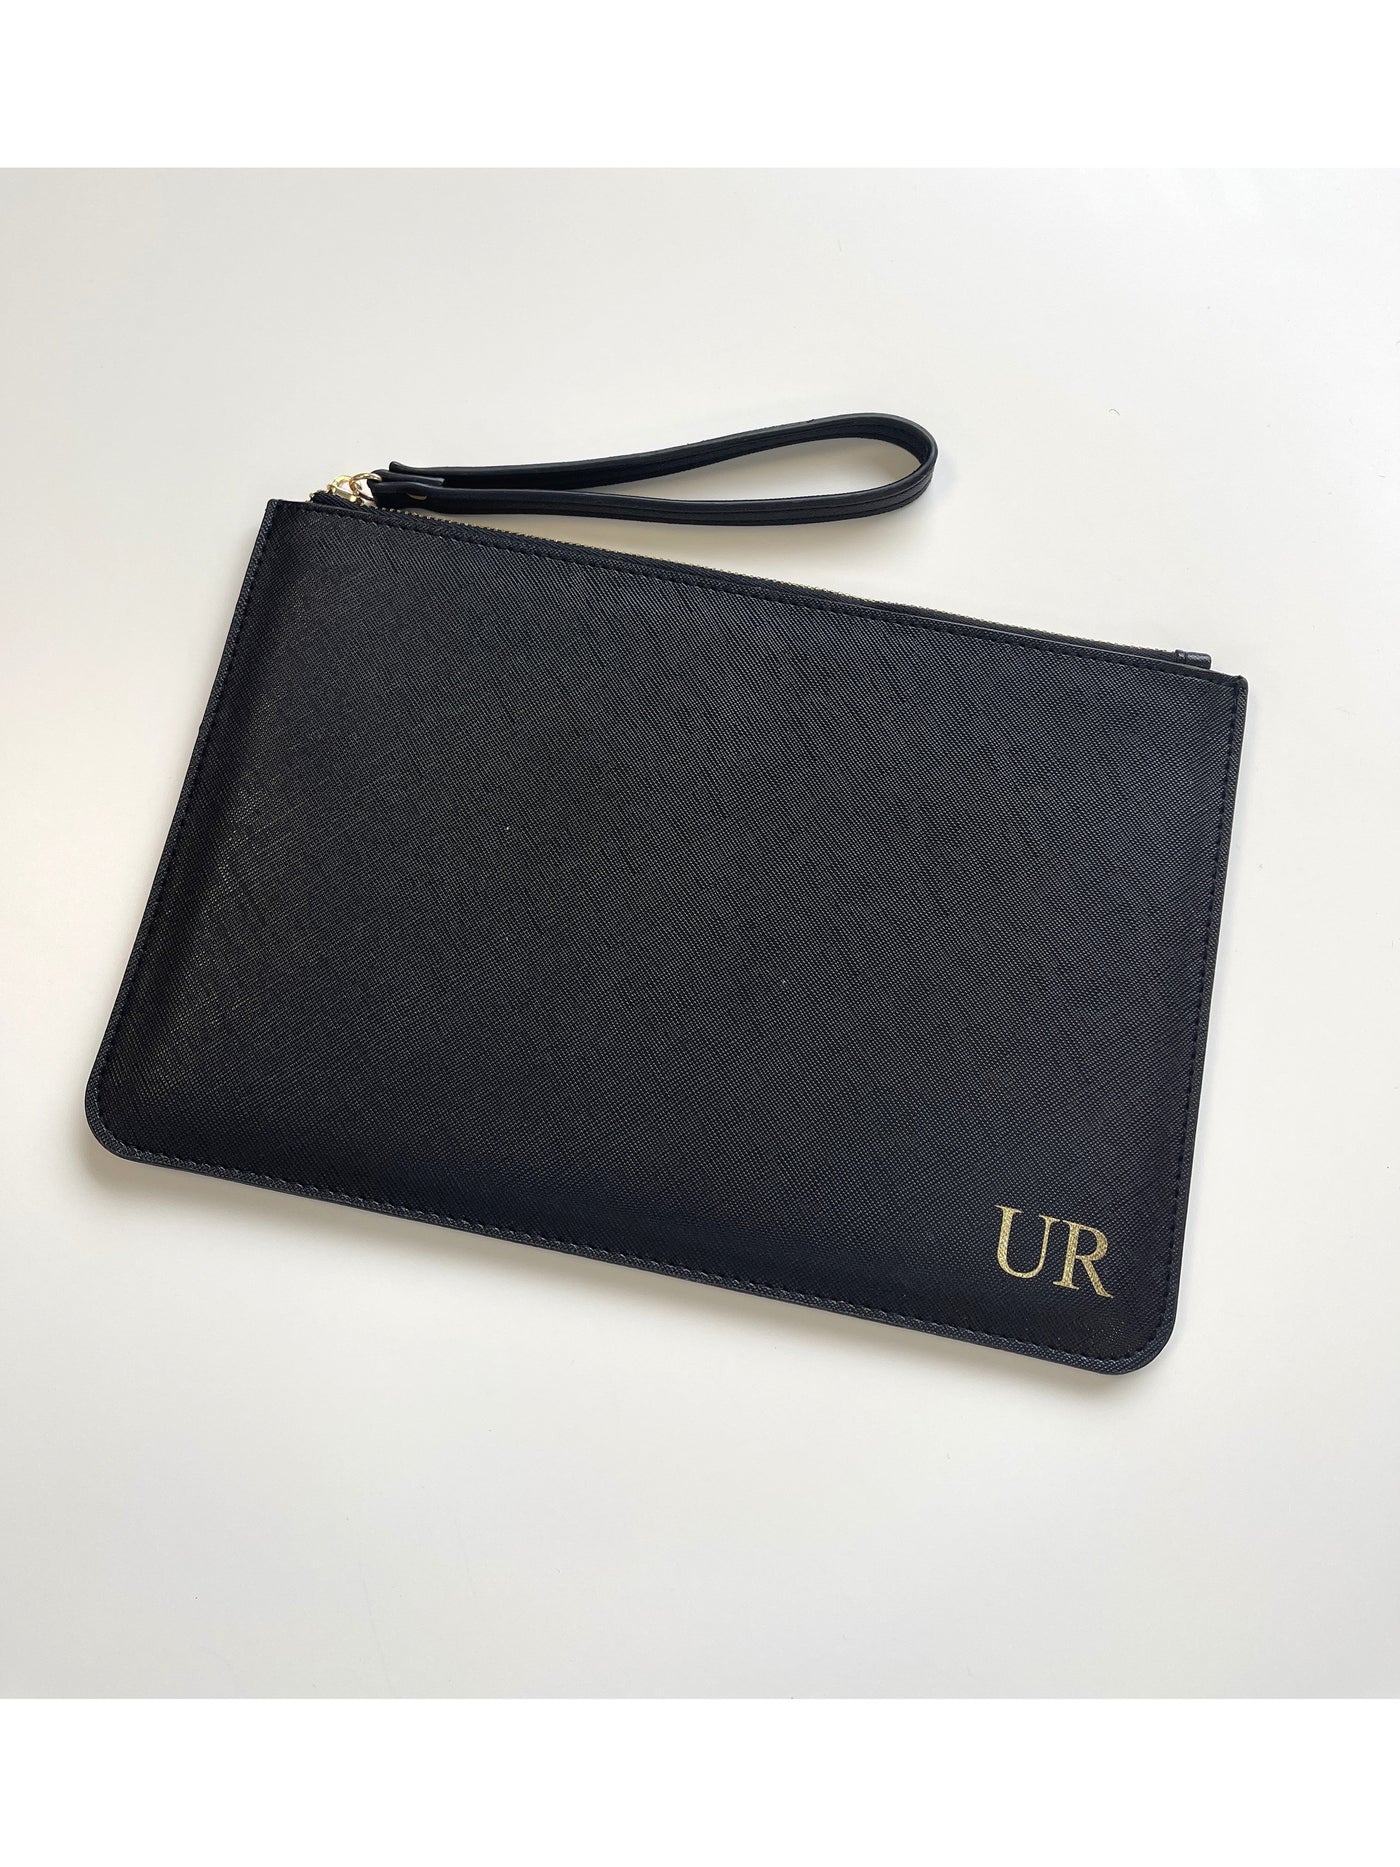 Personalised Clutch bag with monogram